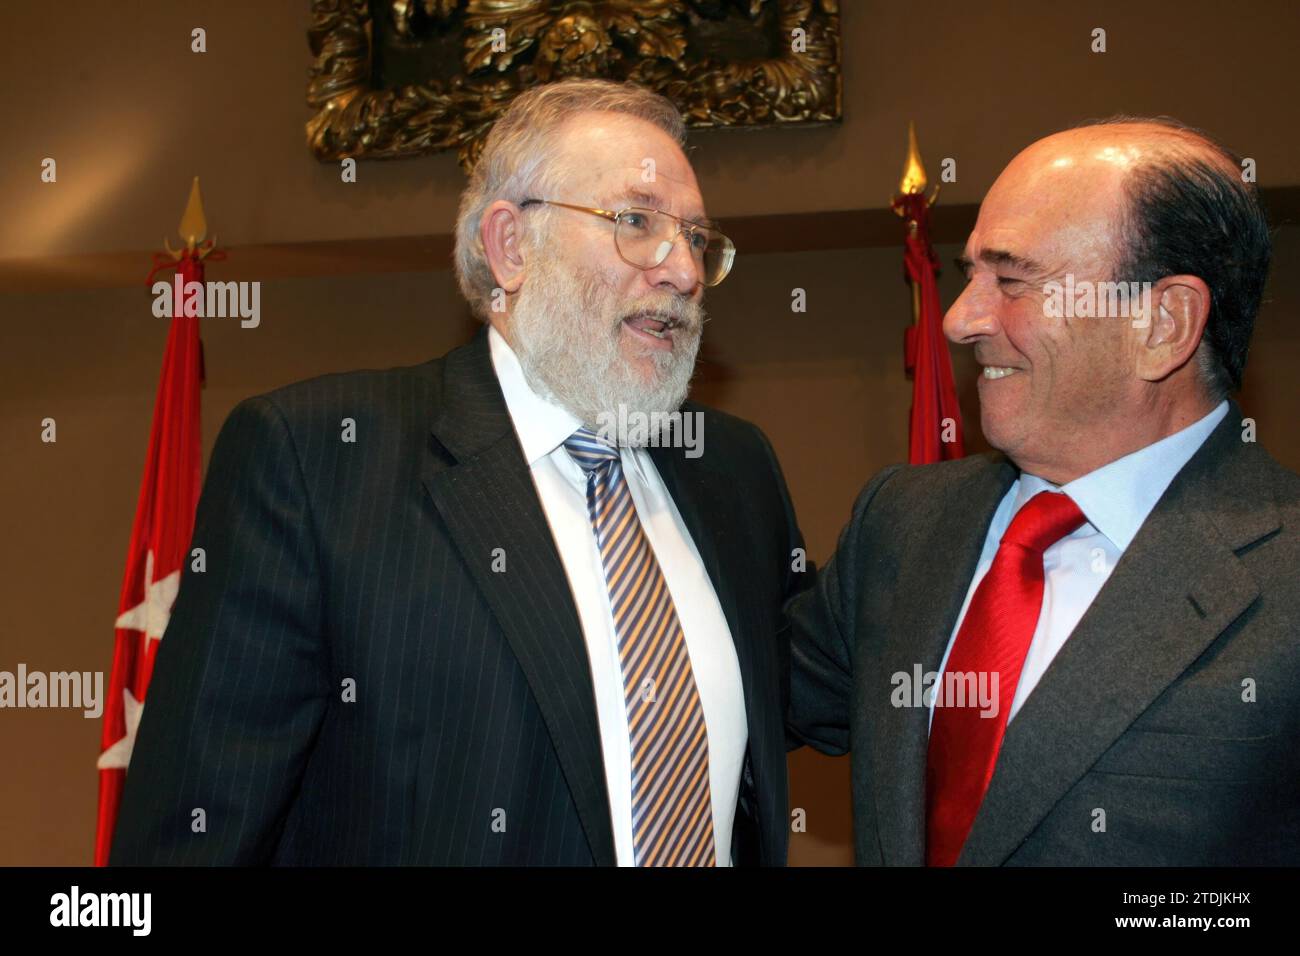 01/18/2005. Madrid. 01-19-05. The rector of the Complutense University, Carlos Berzosa, and the president of the Santander group, Emilio Botin, have signed today an agreement that expands collaboration in teaching matters between both institutions. Photo Javier Prieto. Archdc. Credit: Album / Archivo ABC / Javier Prieto Stock Photo